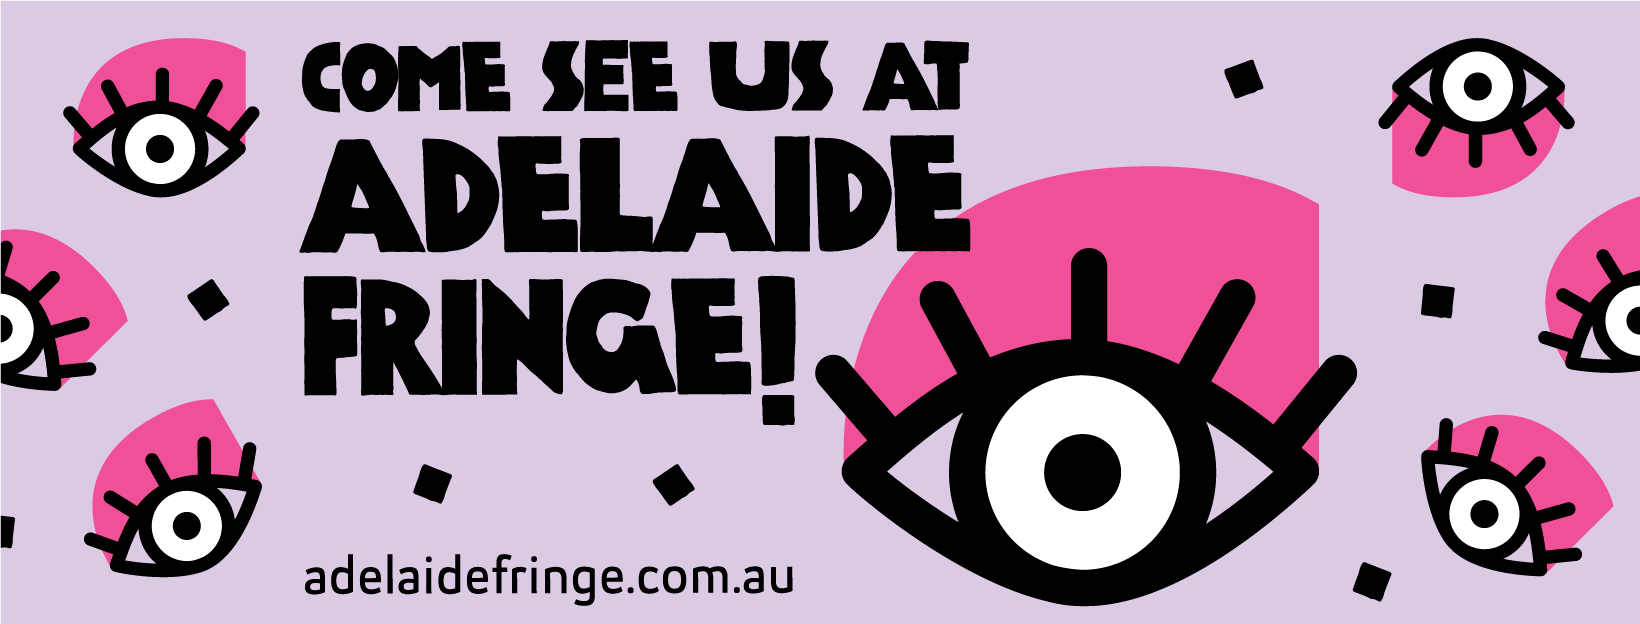 Attend Adelaide Fringe from anywhere in the world!